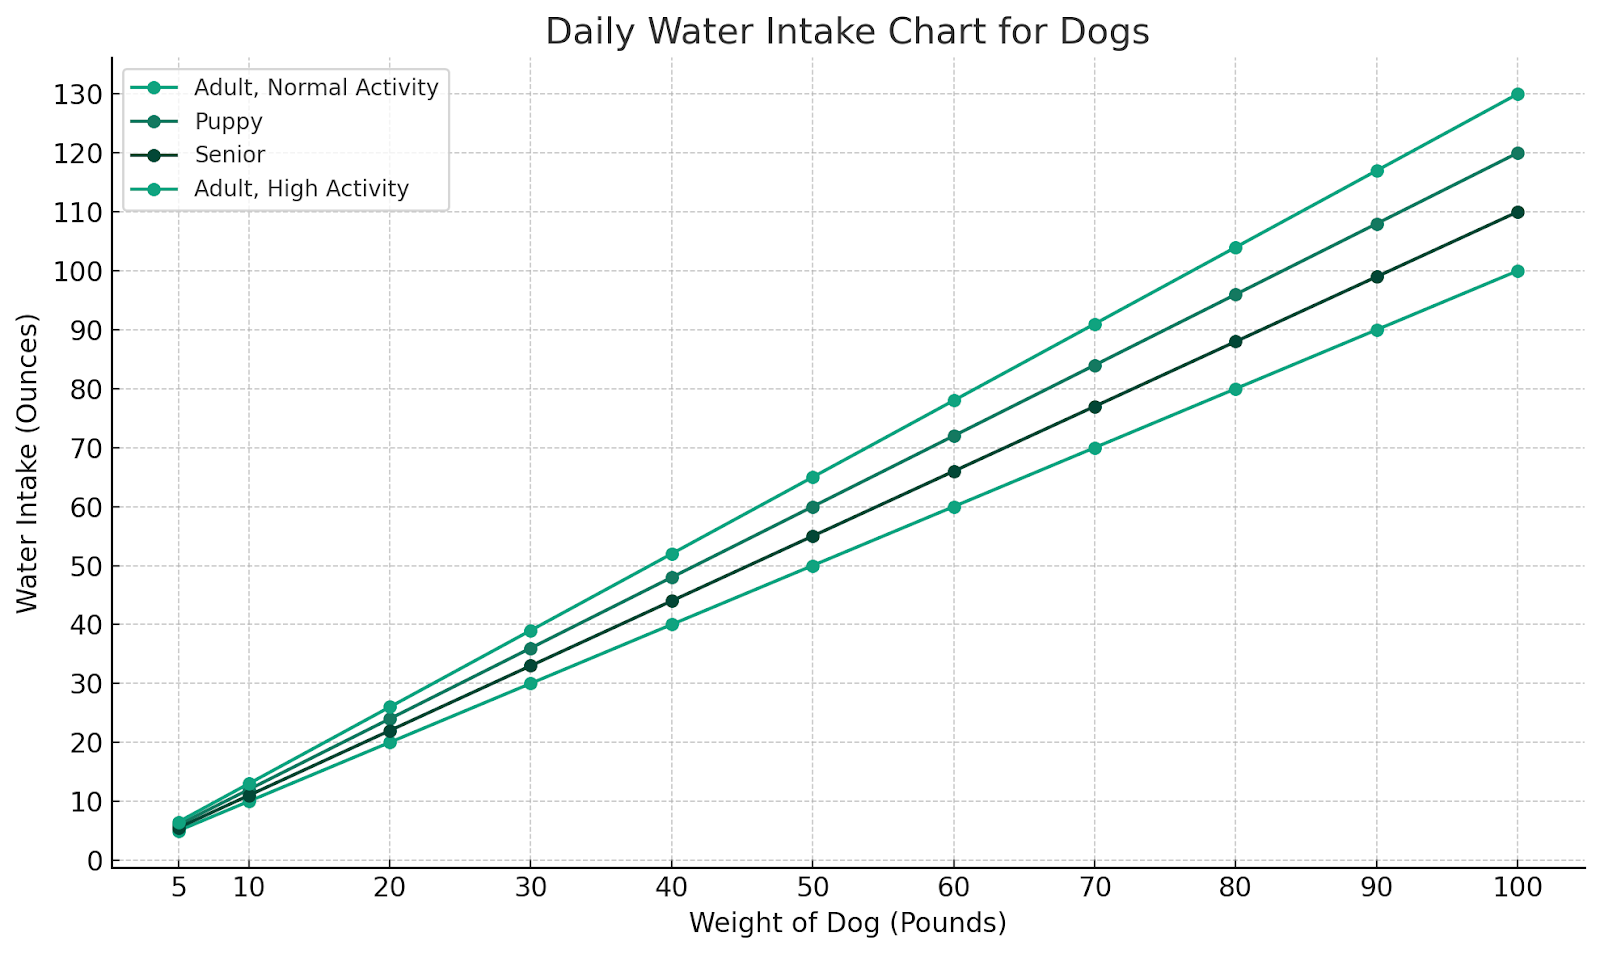 daily water intake chart for dogs by weight, age and activity level